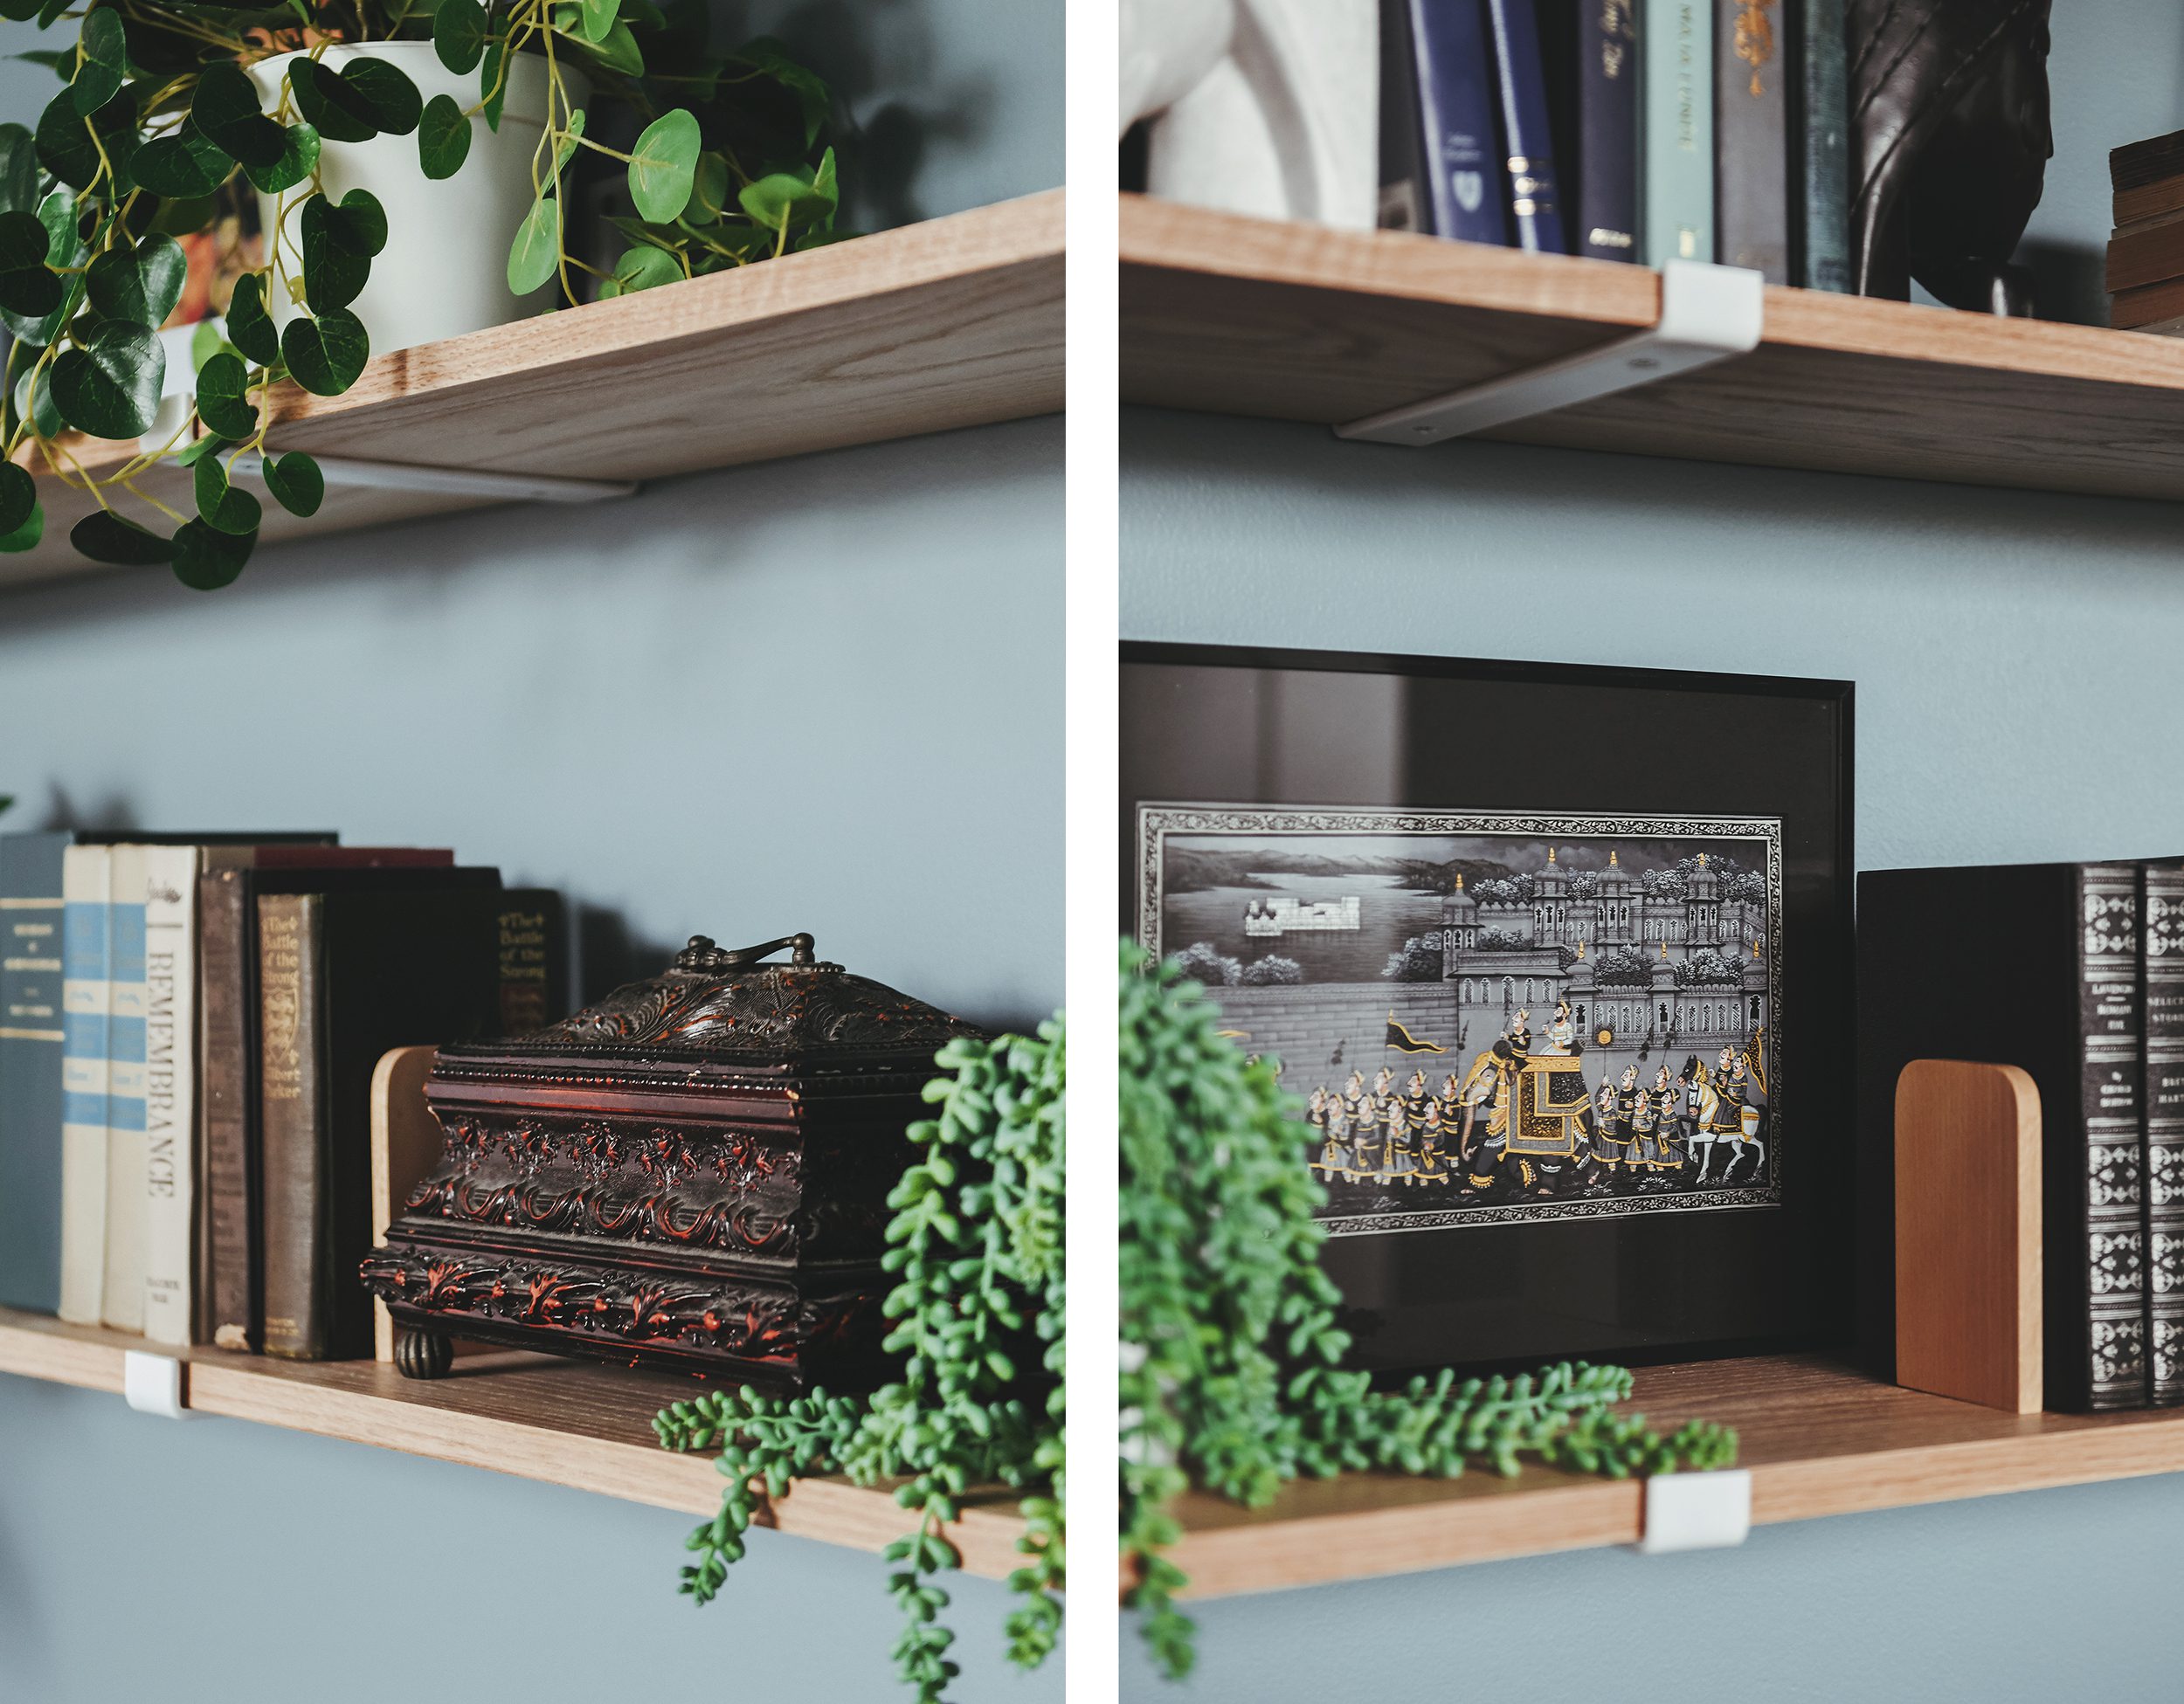 The custom oak shelving is full of books, family memories and found objects // via Yellow Brick Home